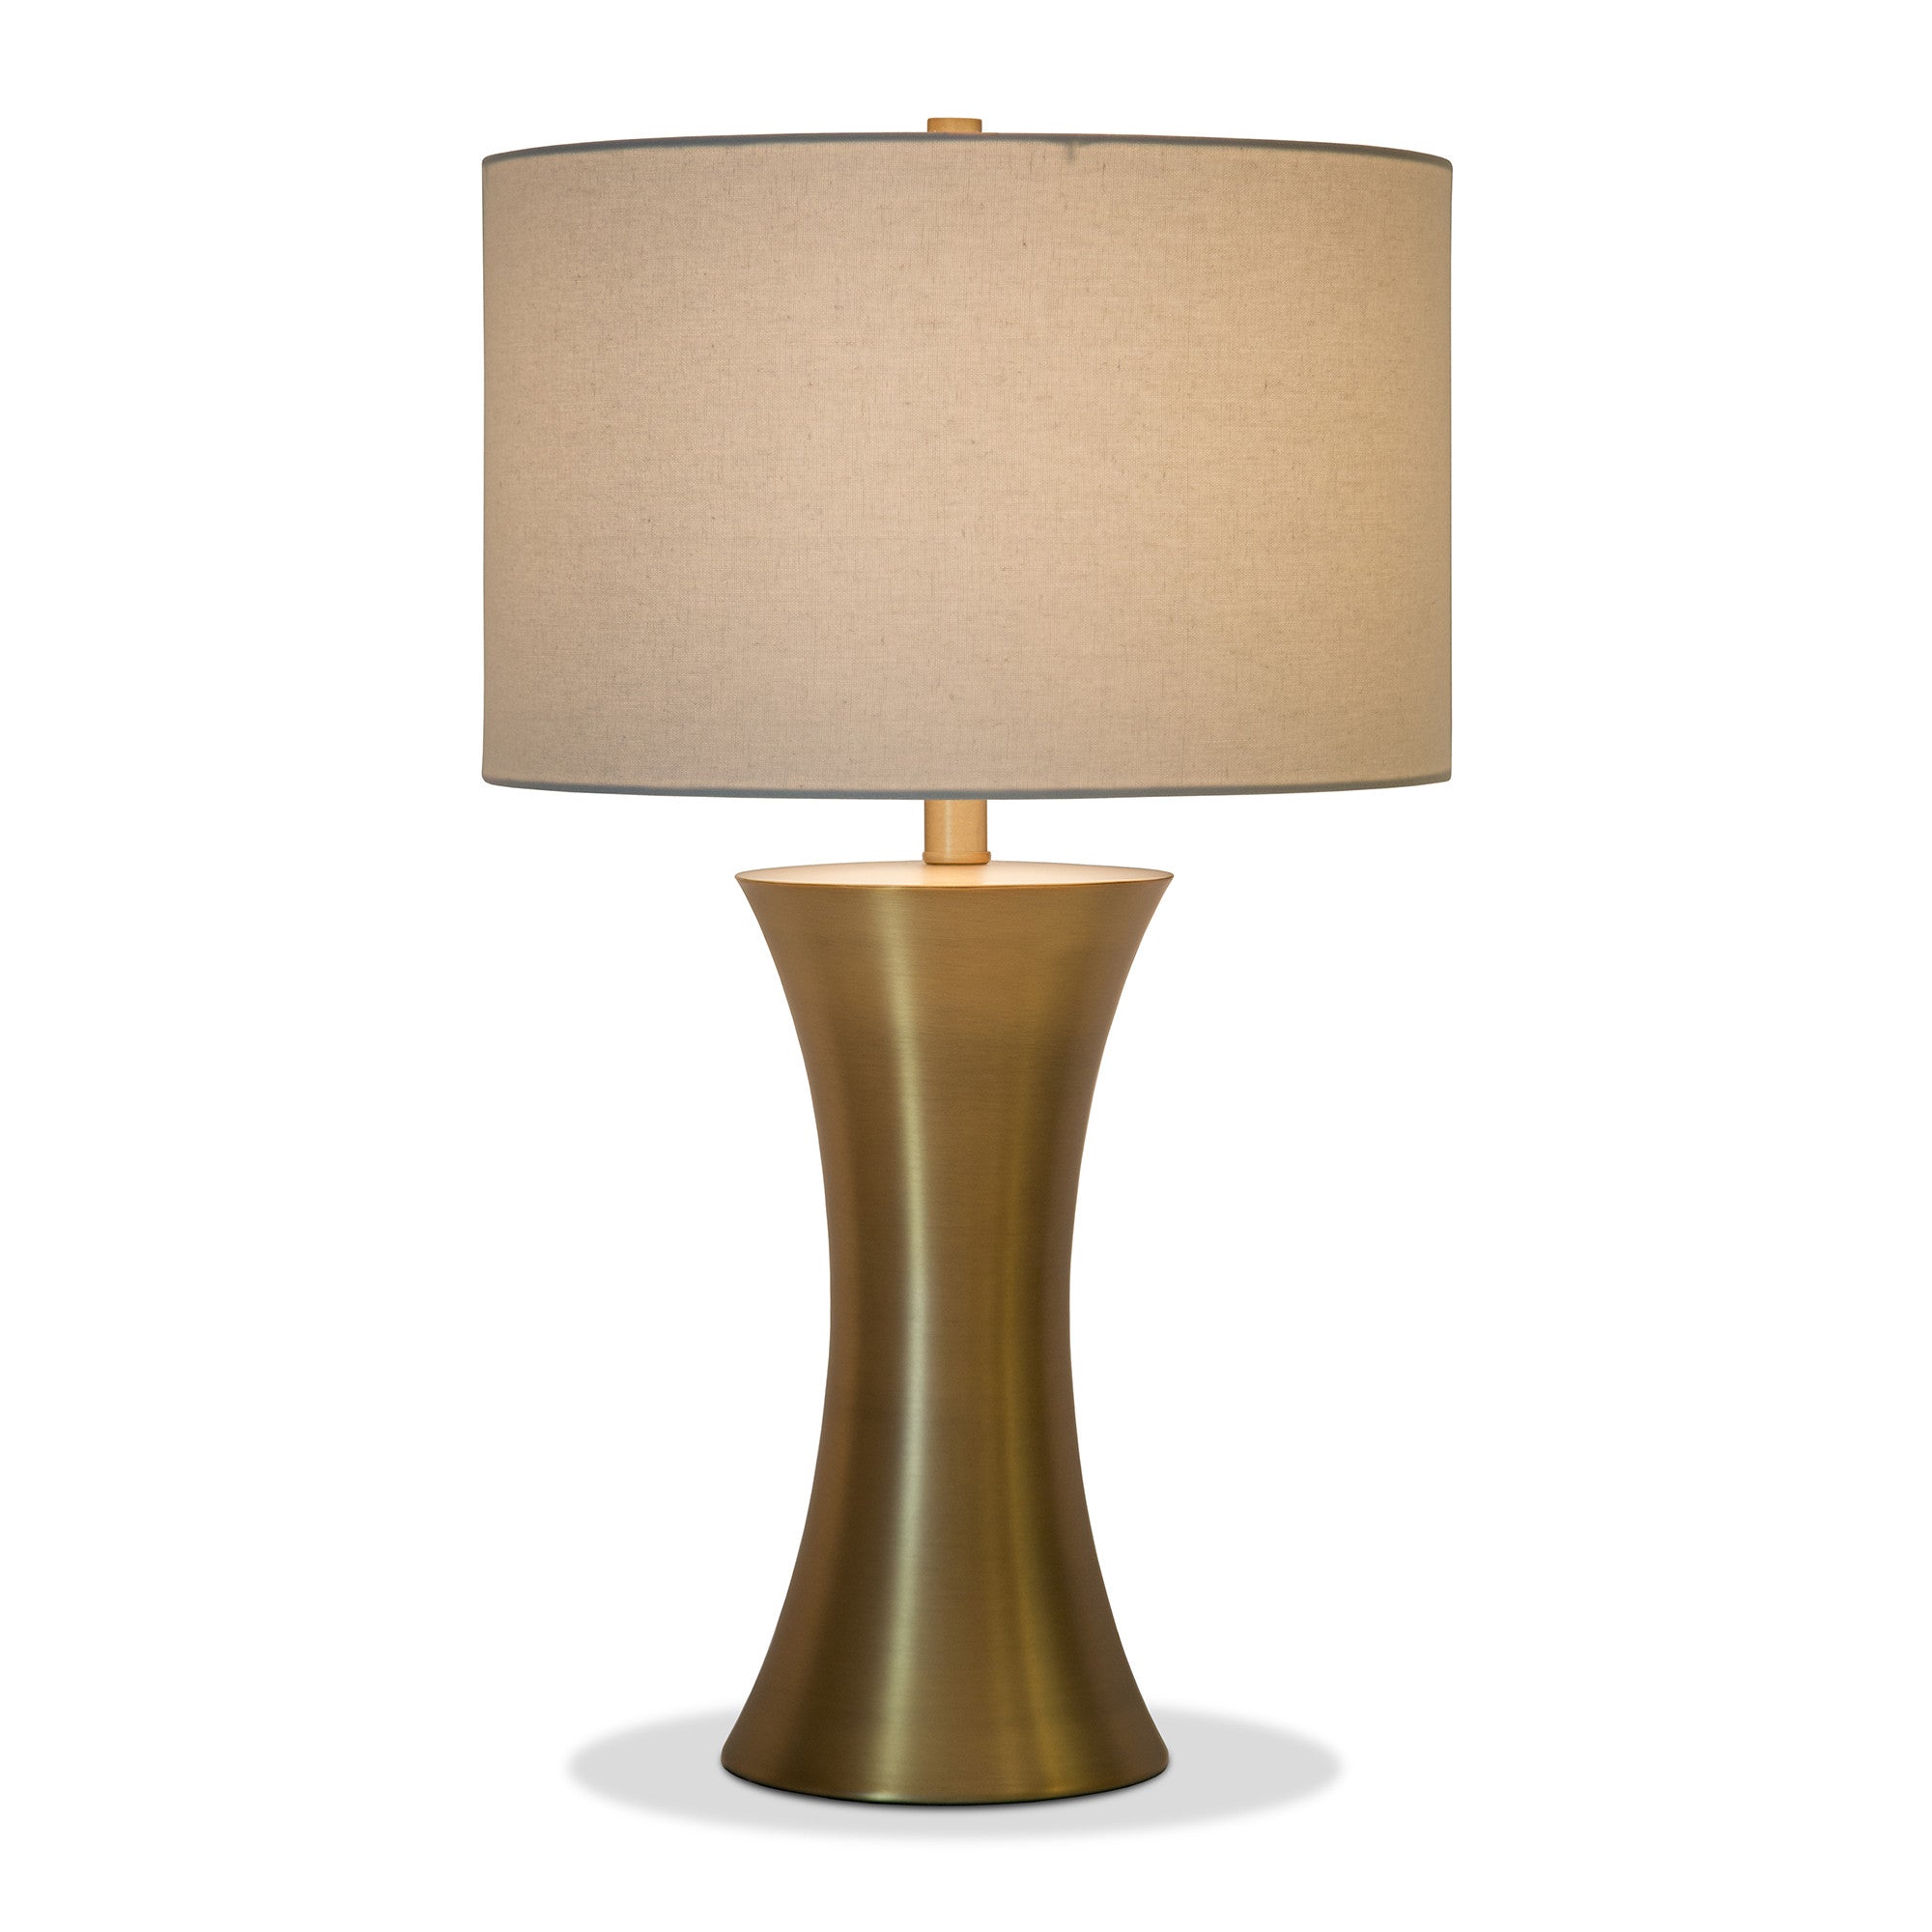 24" Antiqued Brass Metal Table Lamp With White Drum Shade